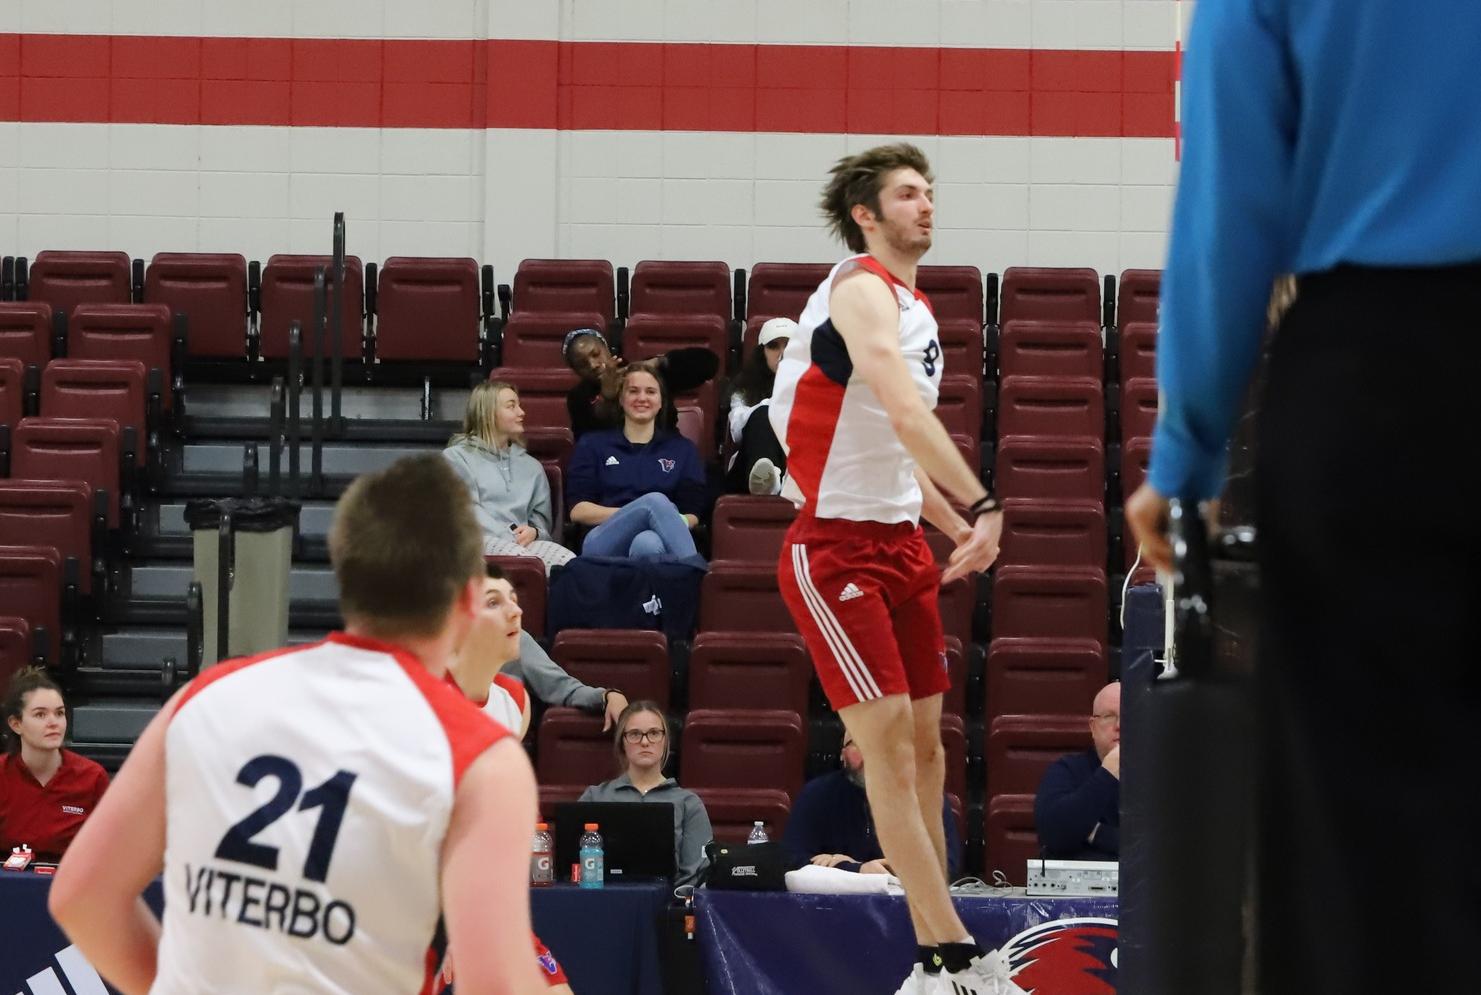 Viterbo Falls to Clarke in Four Sets